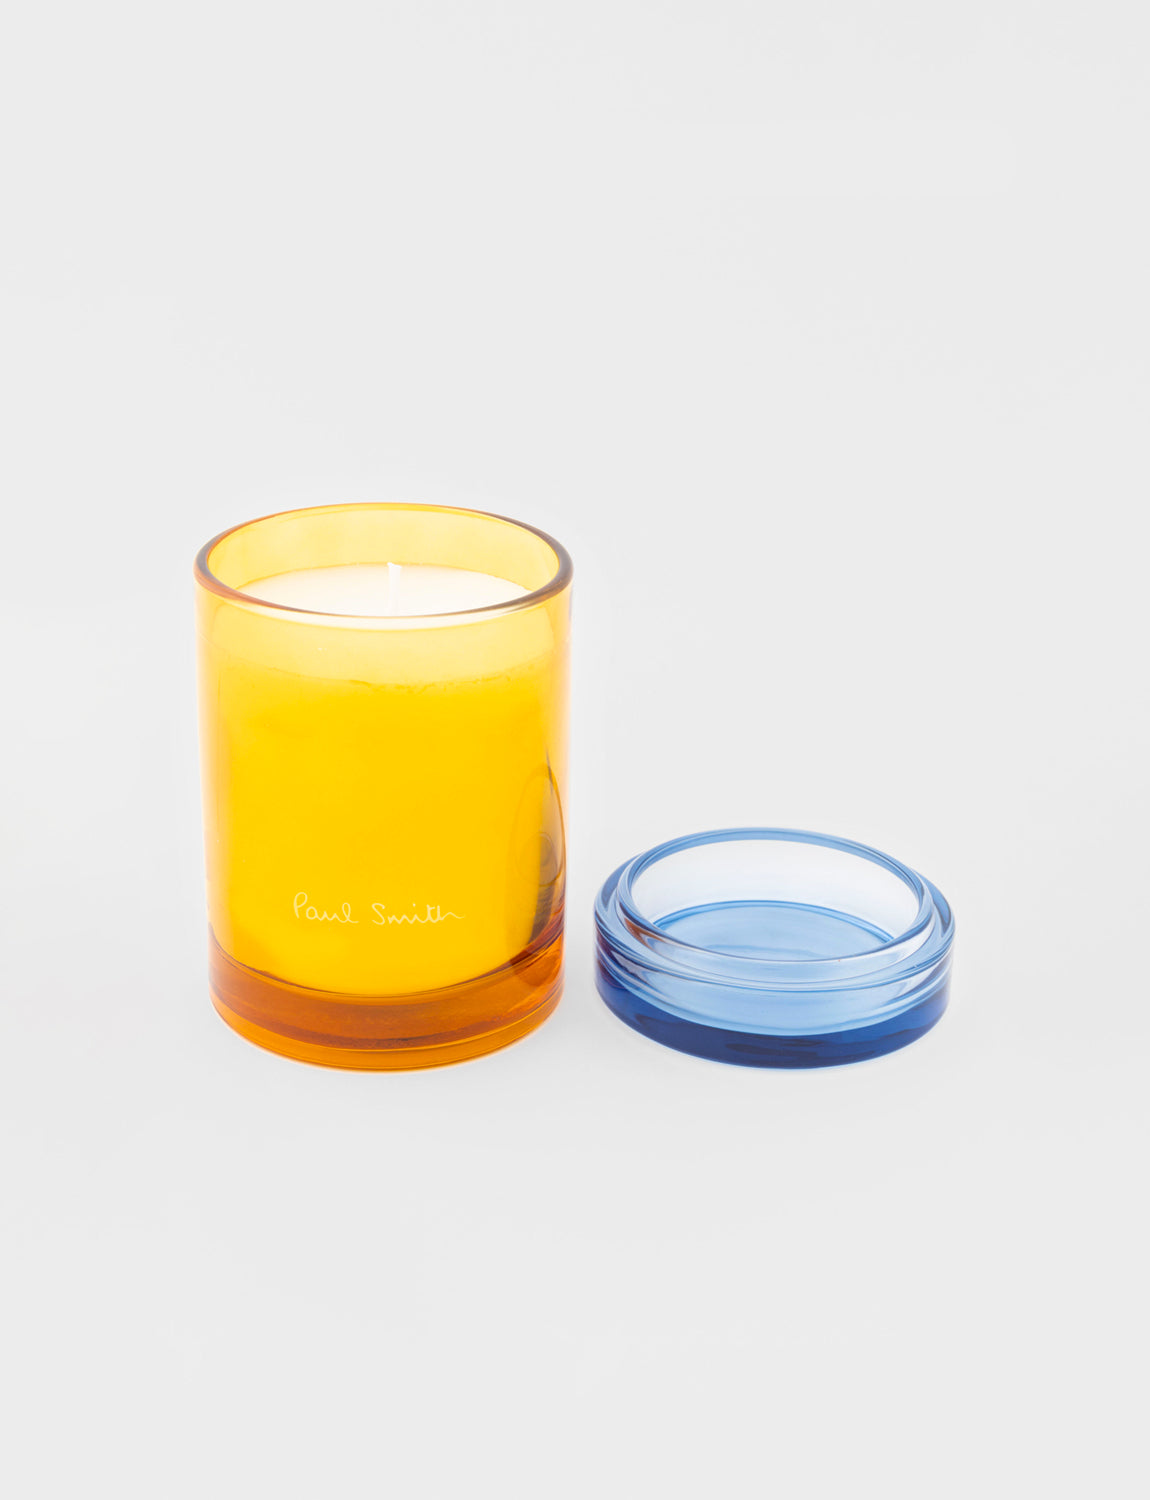 Paul Smith Day Dreamer Scented Candle